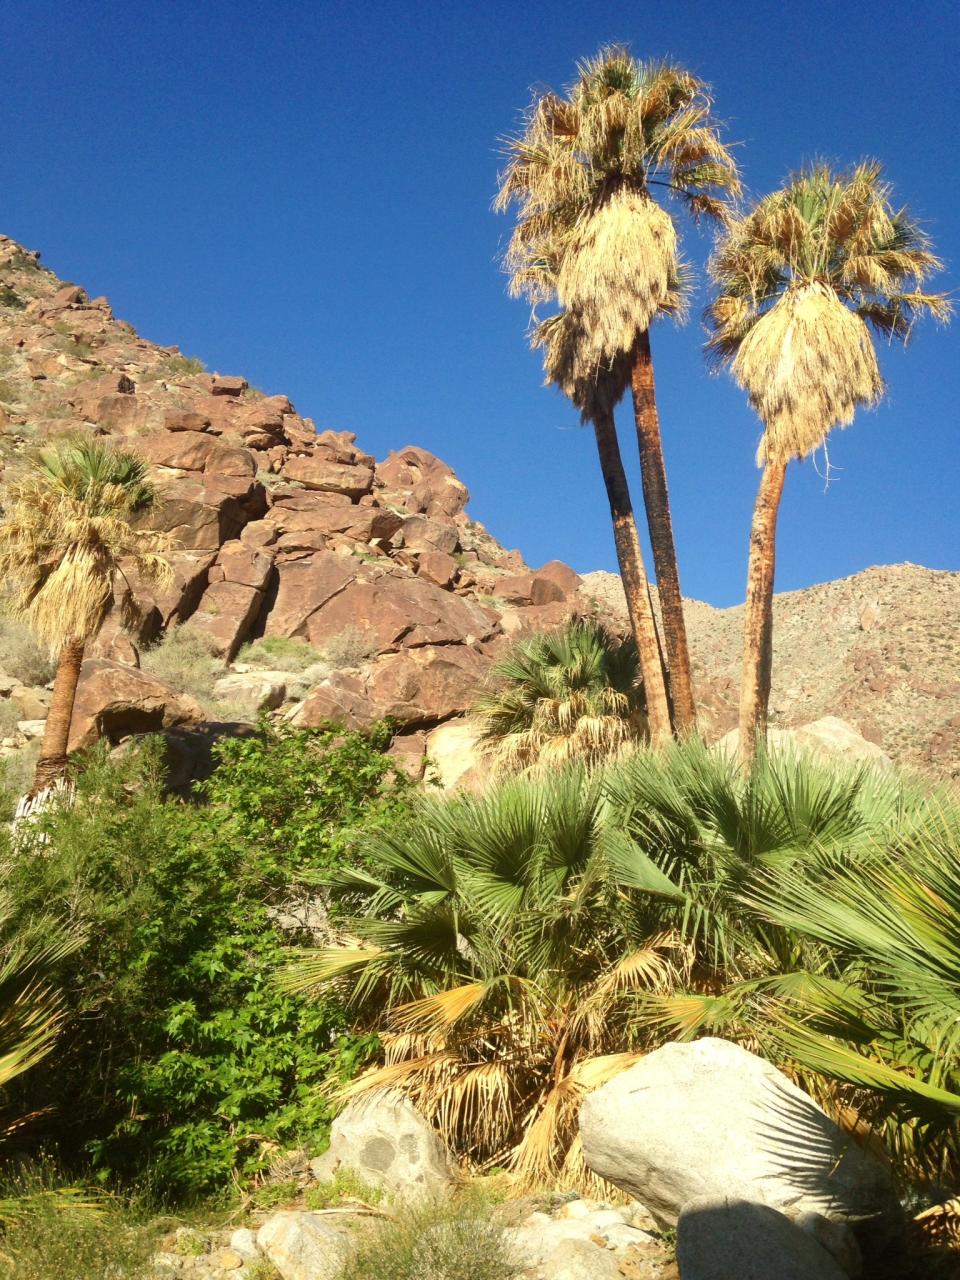 California fan palms and lush vegetation form beautiful Palm Canyon oasis high above the desert.